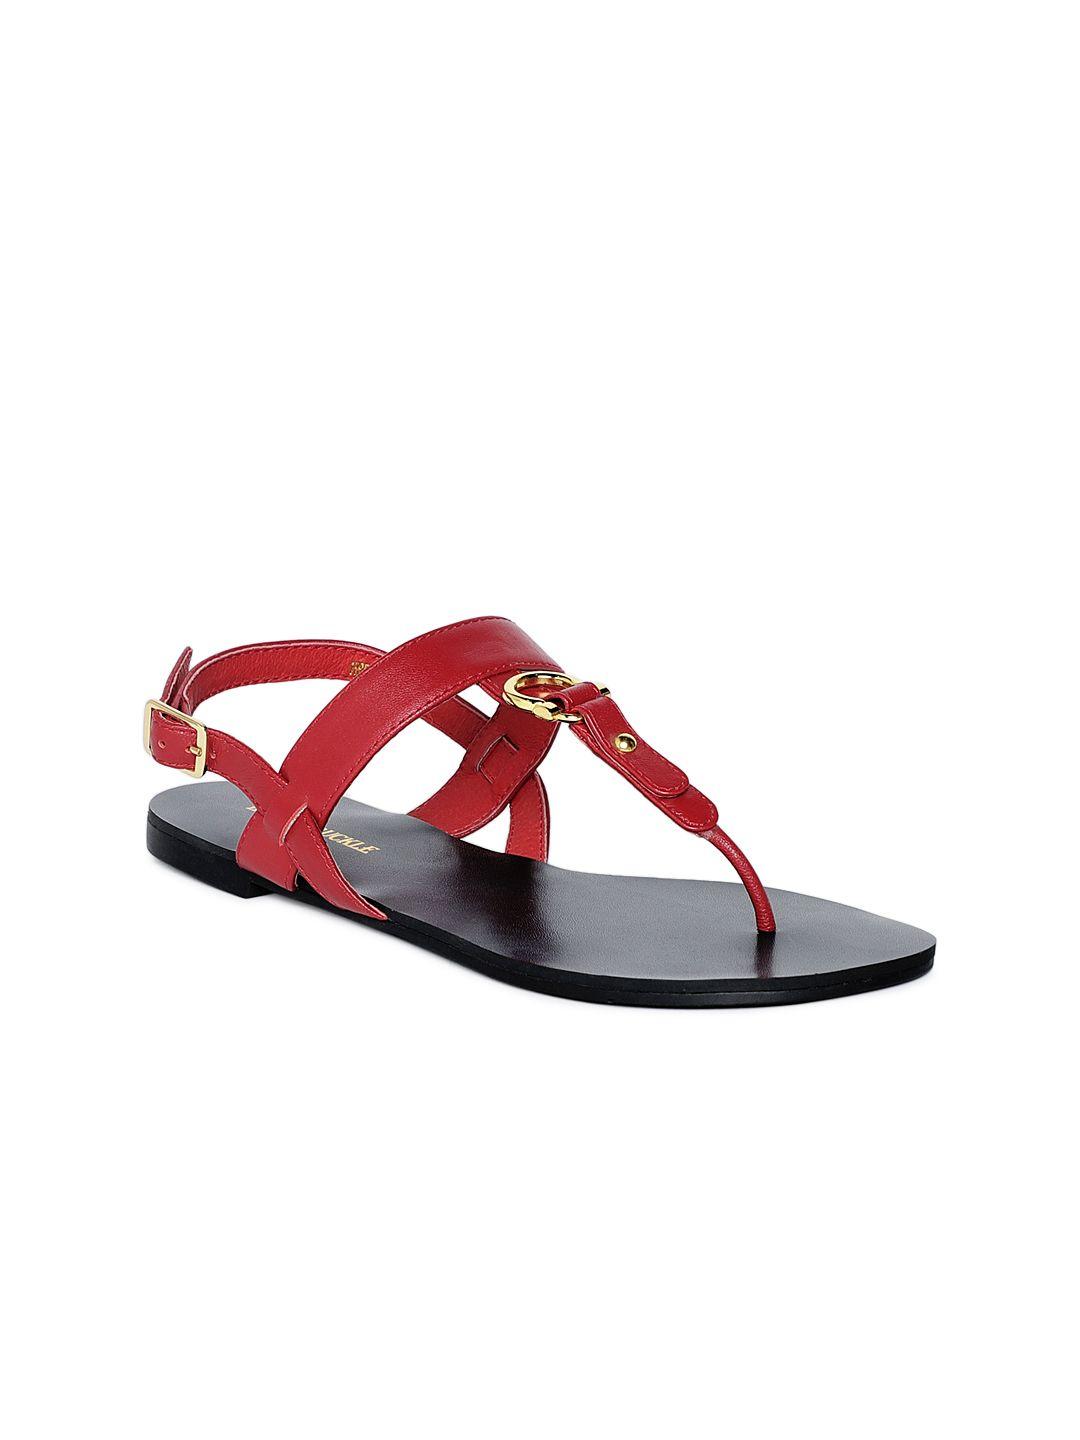 heel & buckle london women red solid leather t-strap flats